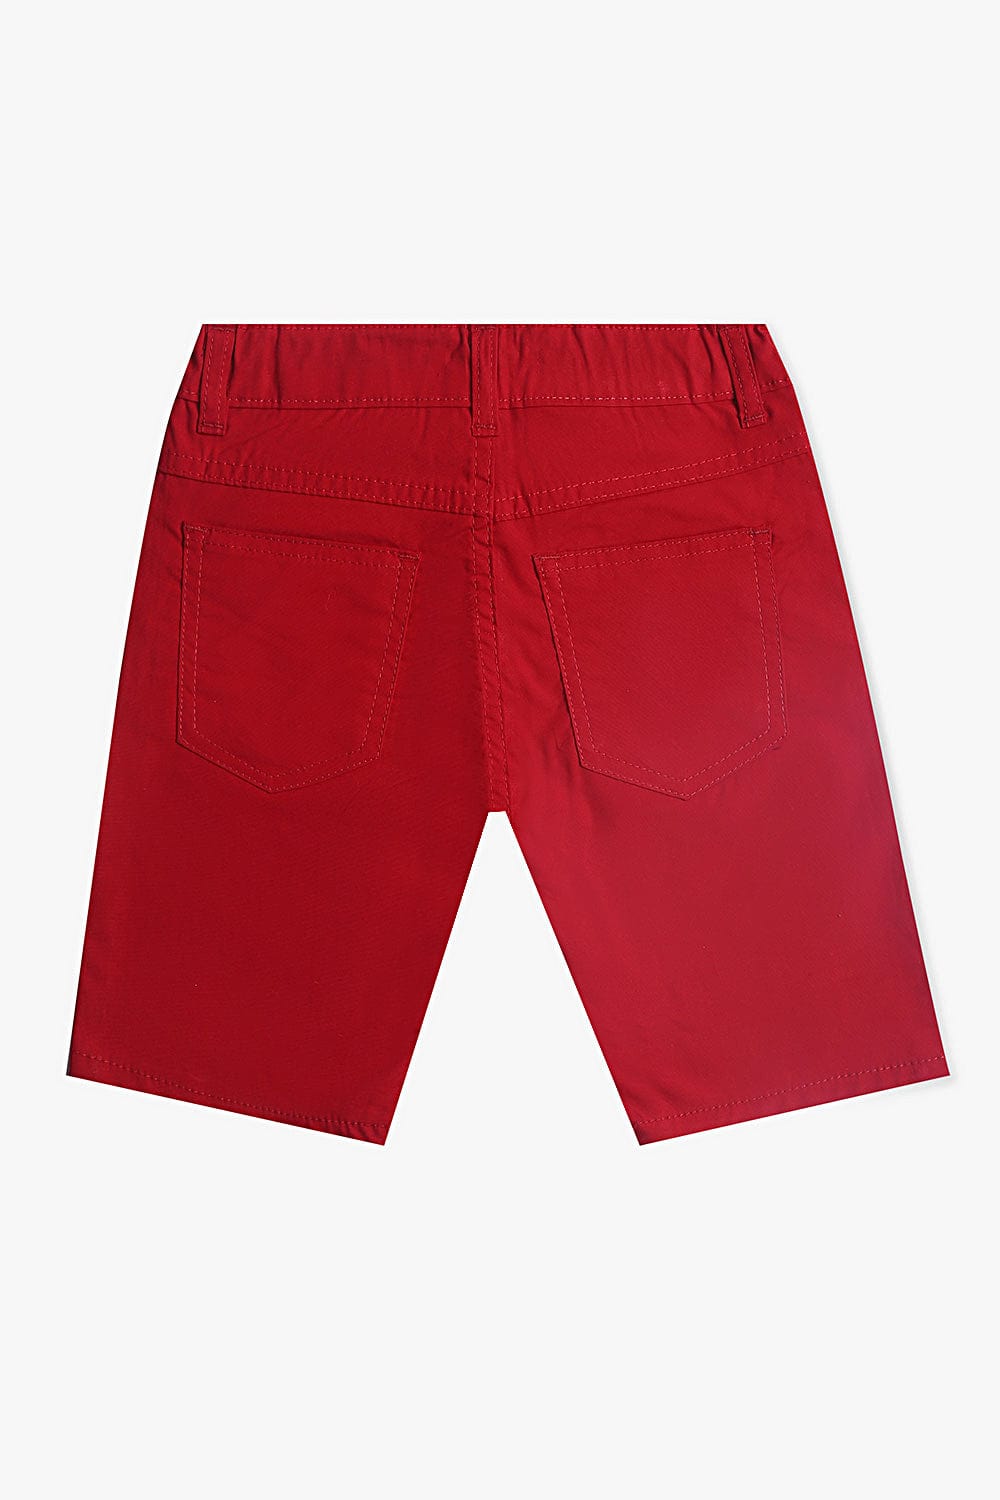 Hope Not Out by Shahid Afridi Boys Non Denim Shorts Casual Shorts